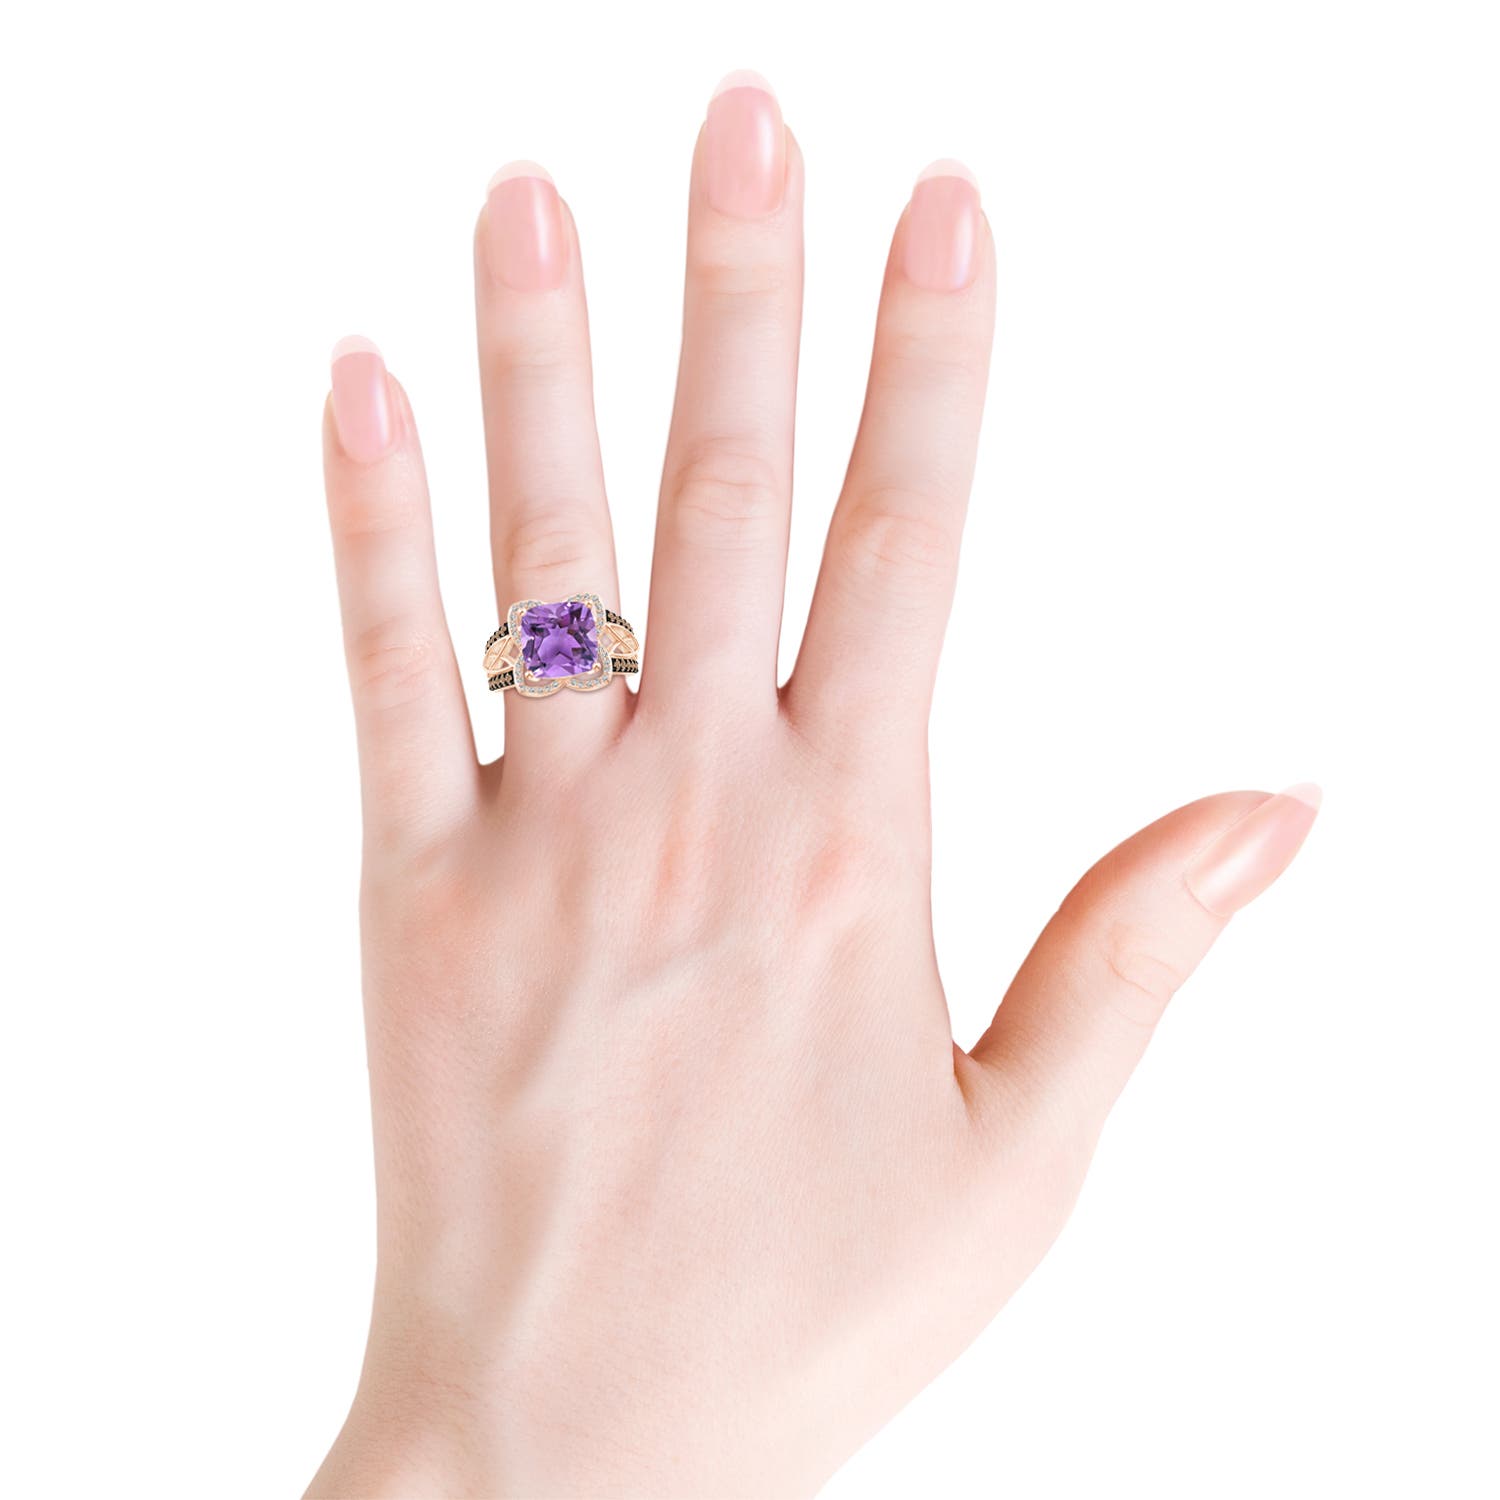 AA - Amethyst / 4.41 CT / 14 KT Rose Gold